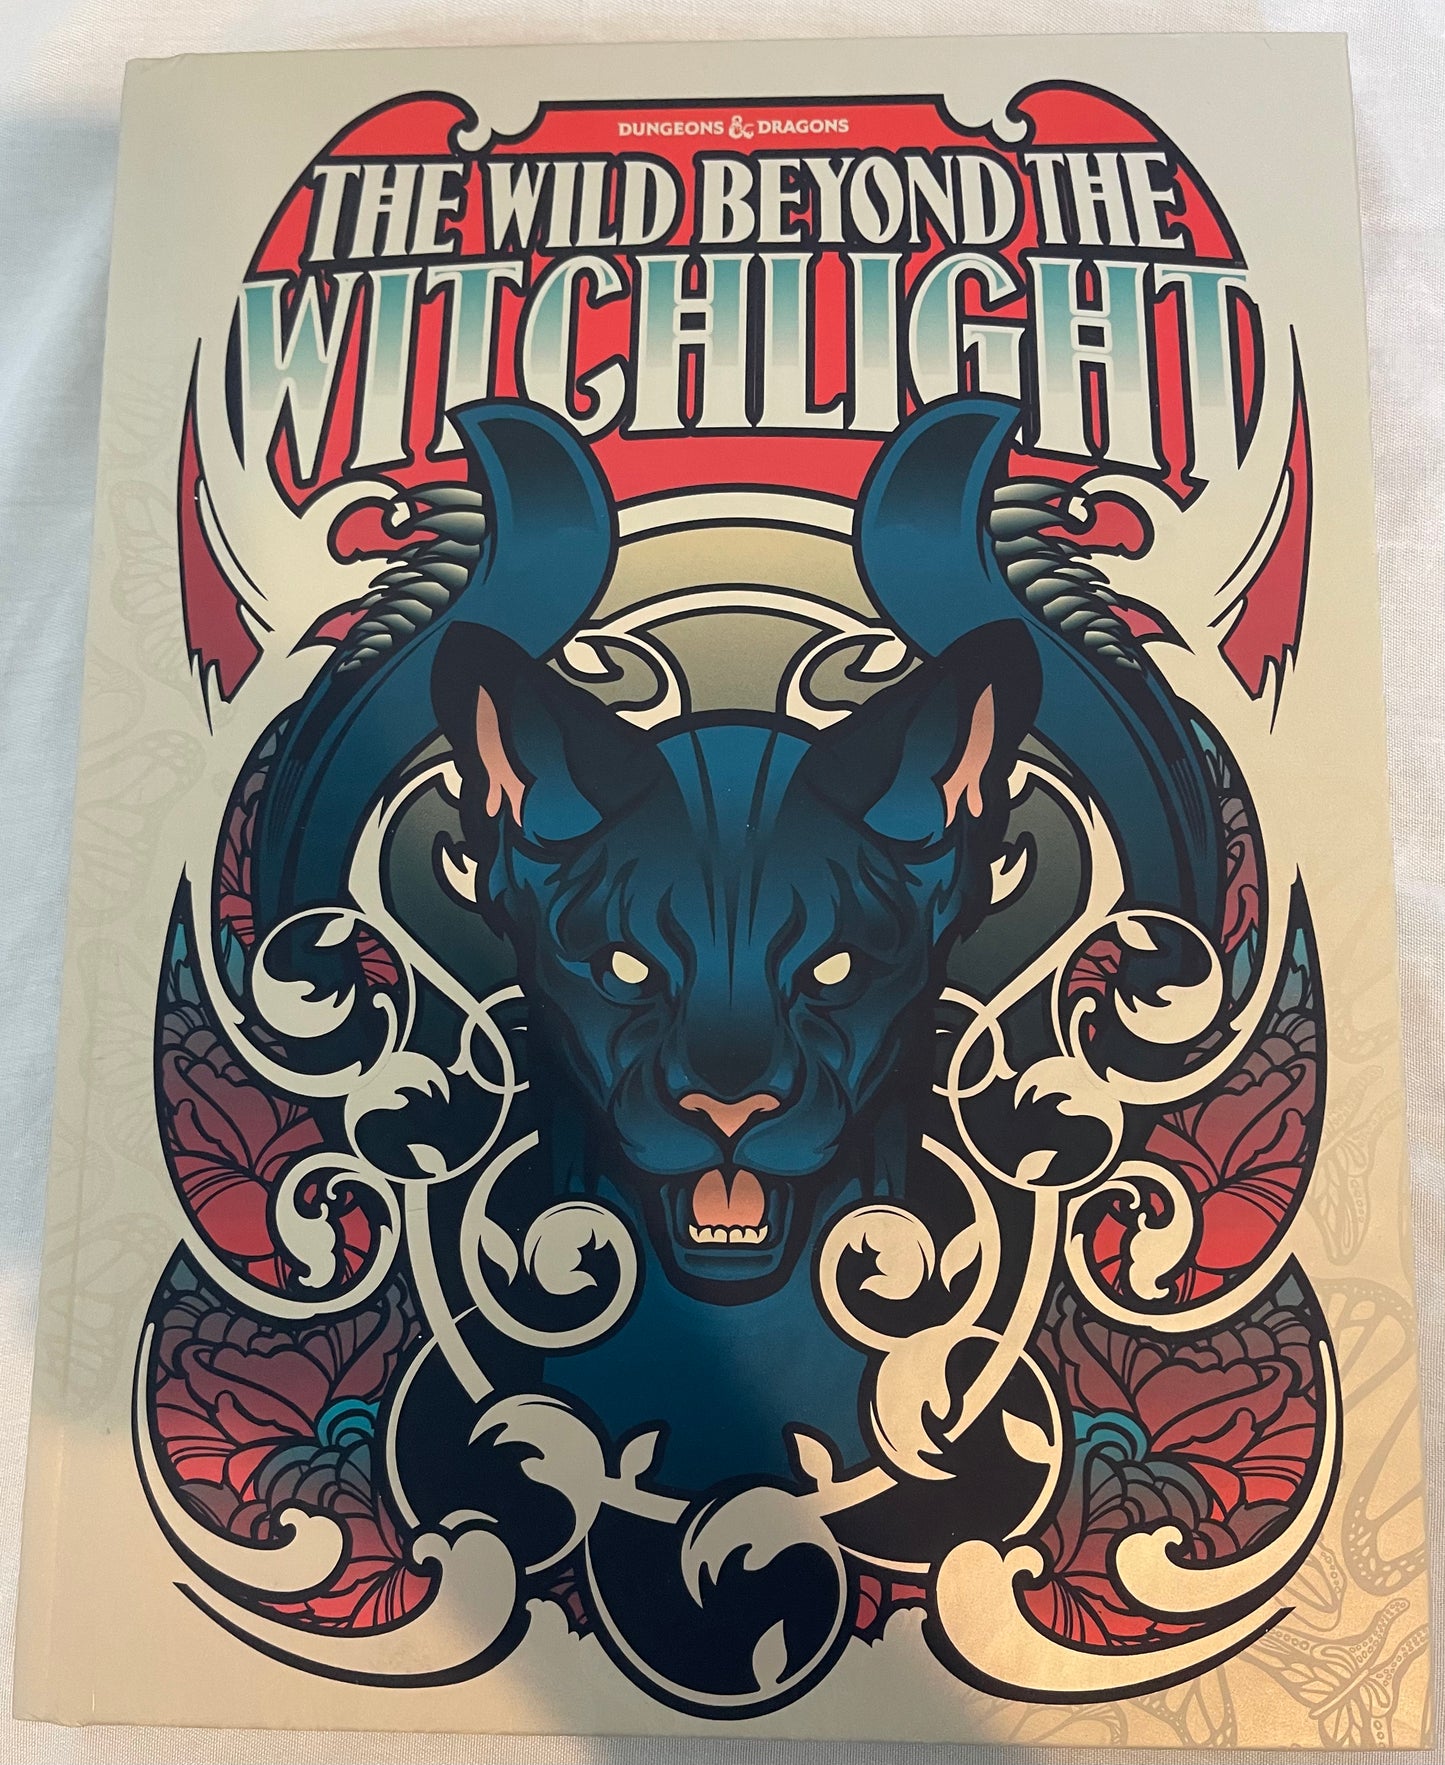 D&D The Wild Beyond The Witchlight